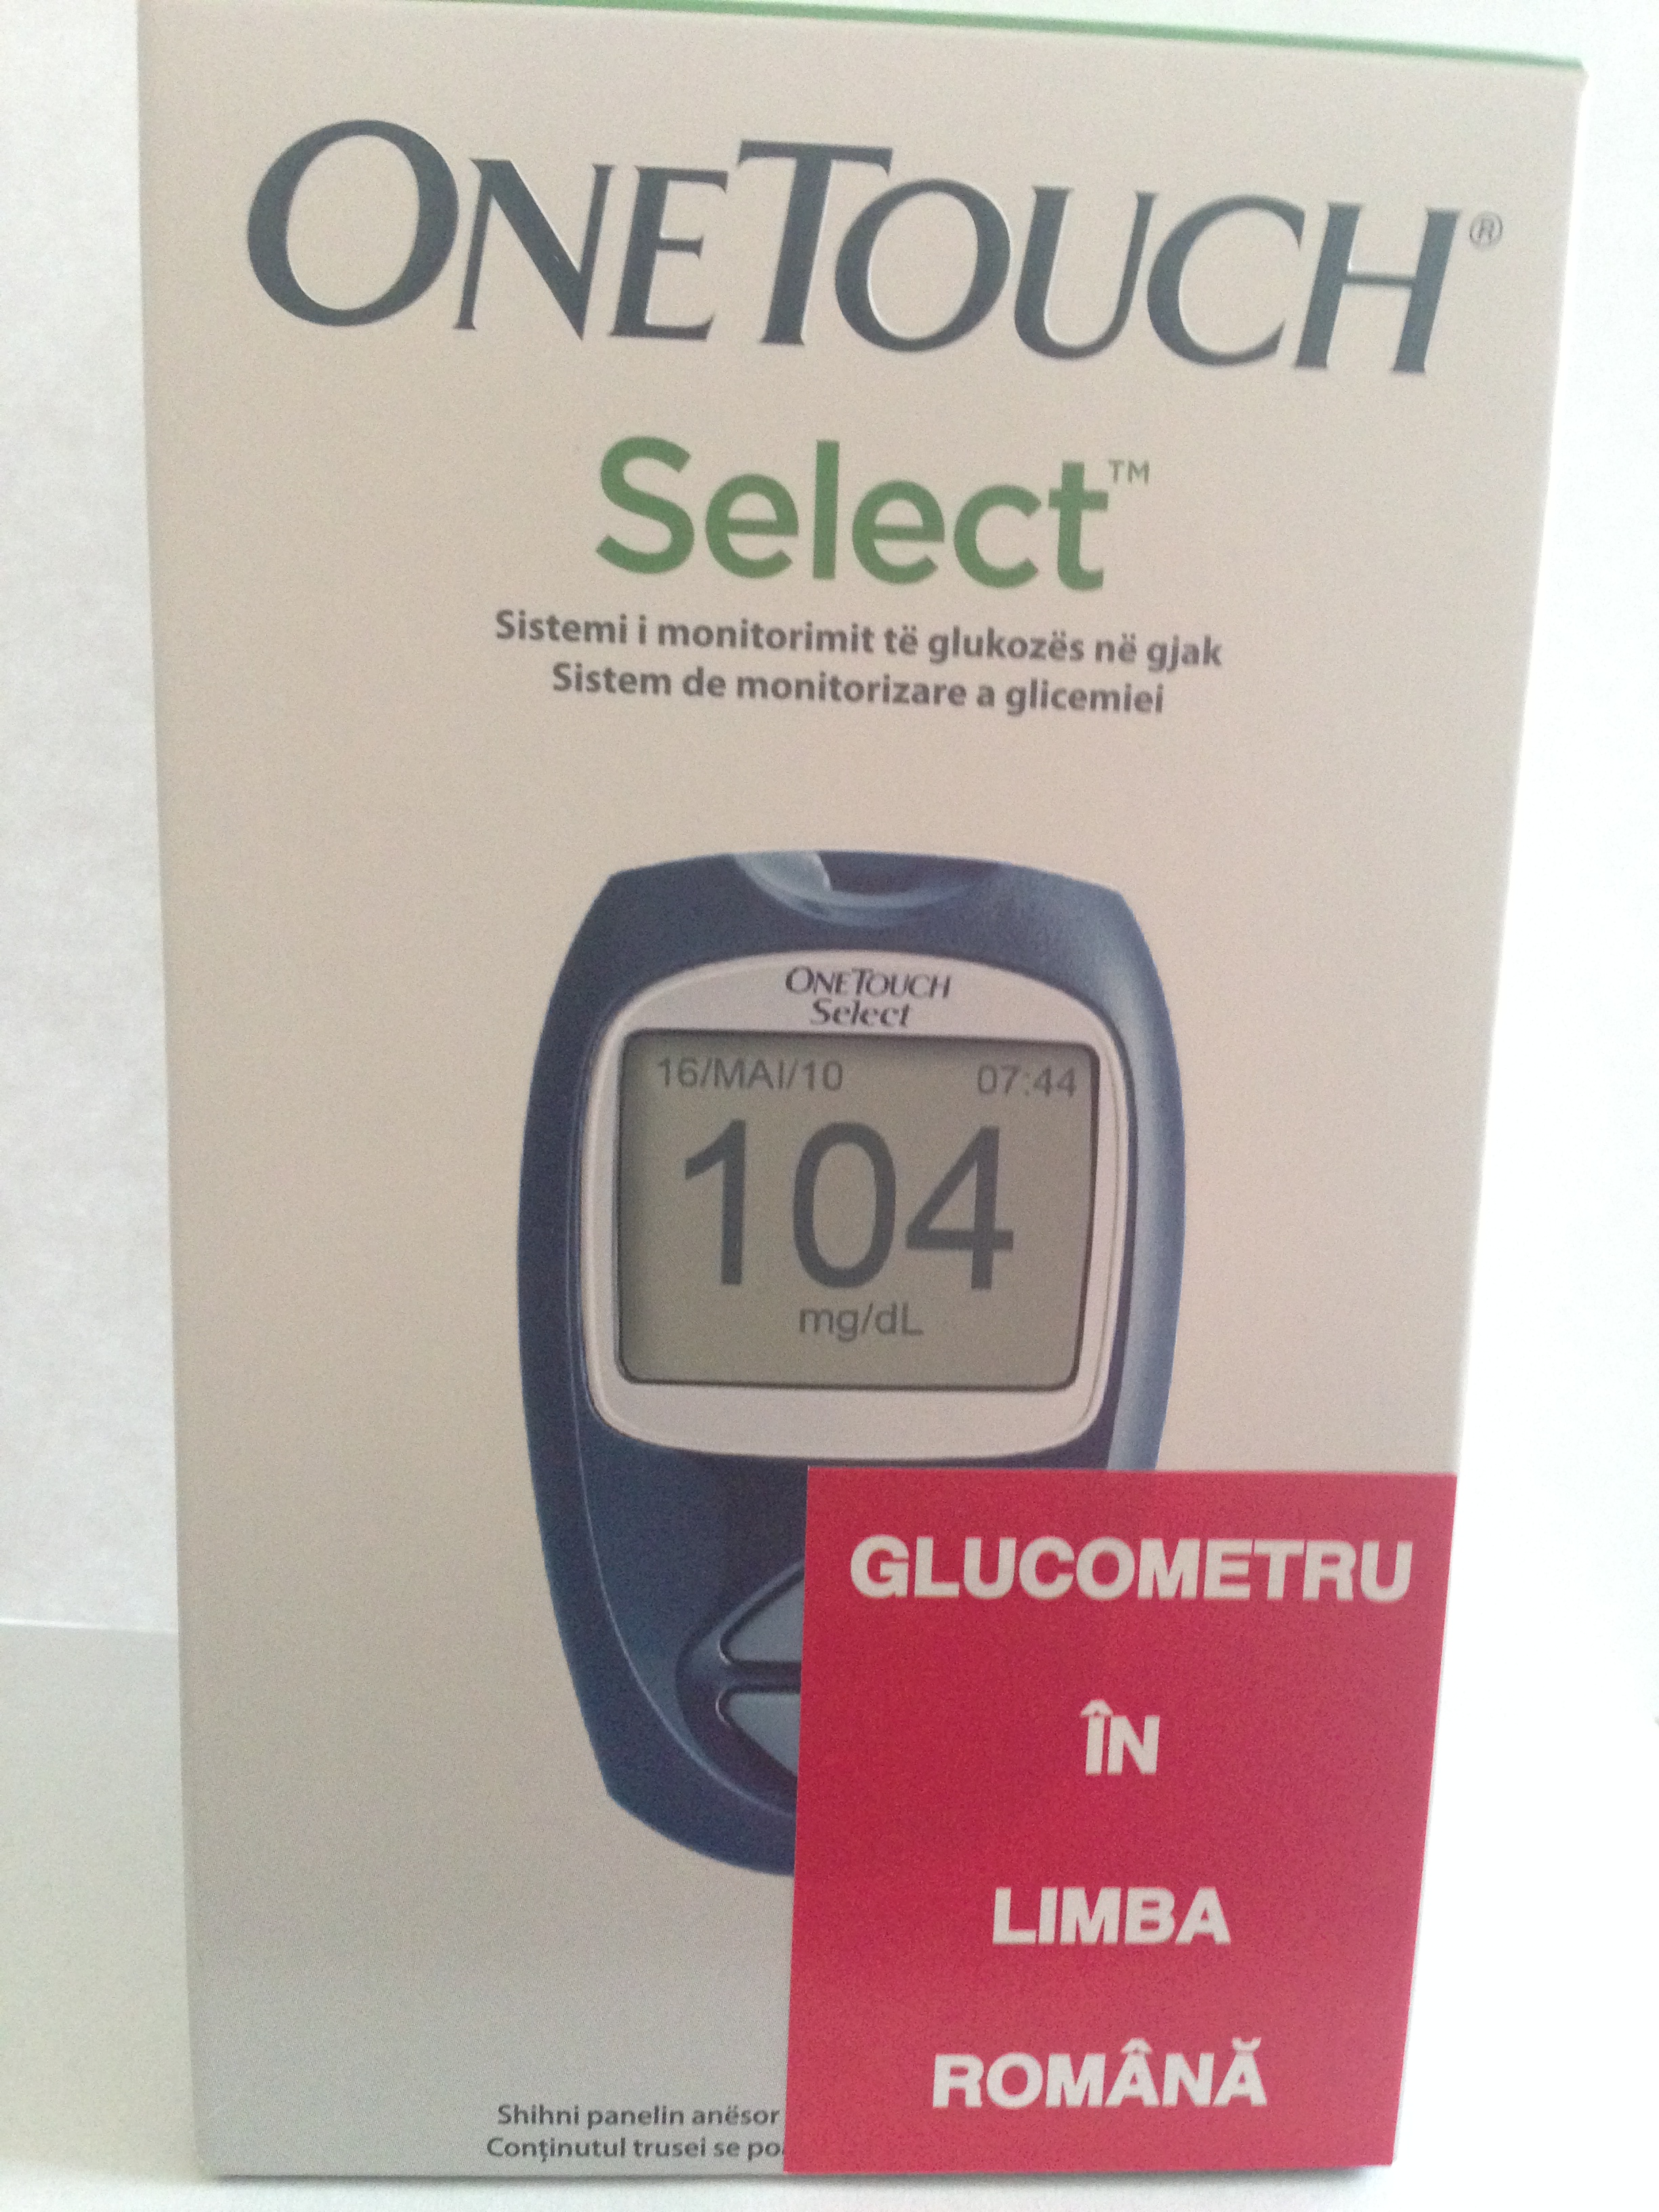 One Touch Select glucometru